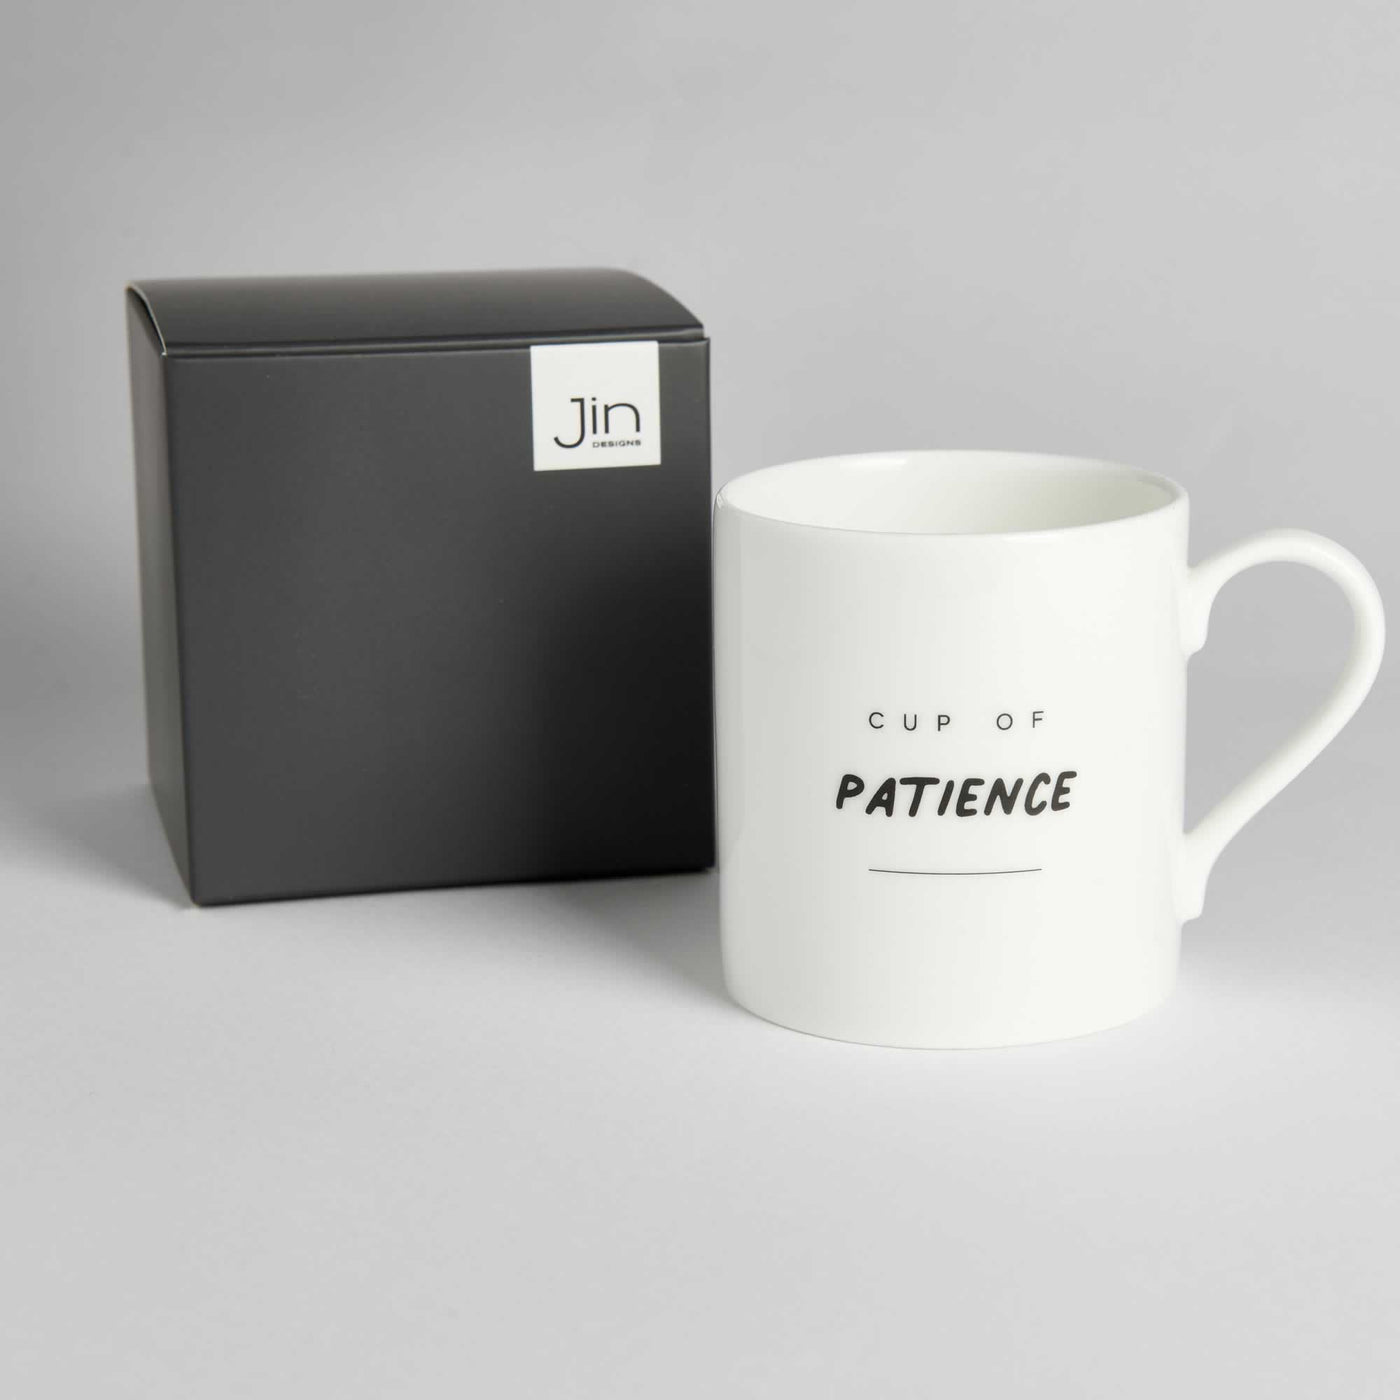 Cup of Patience Mug with gift box